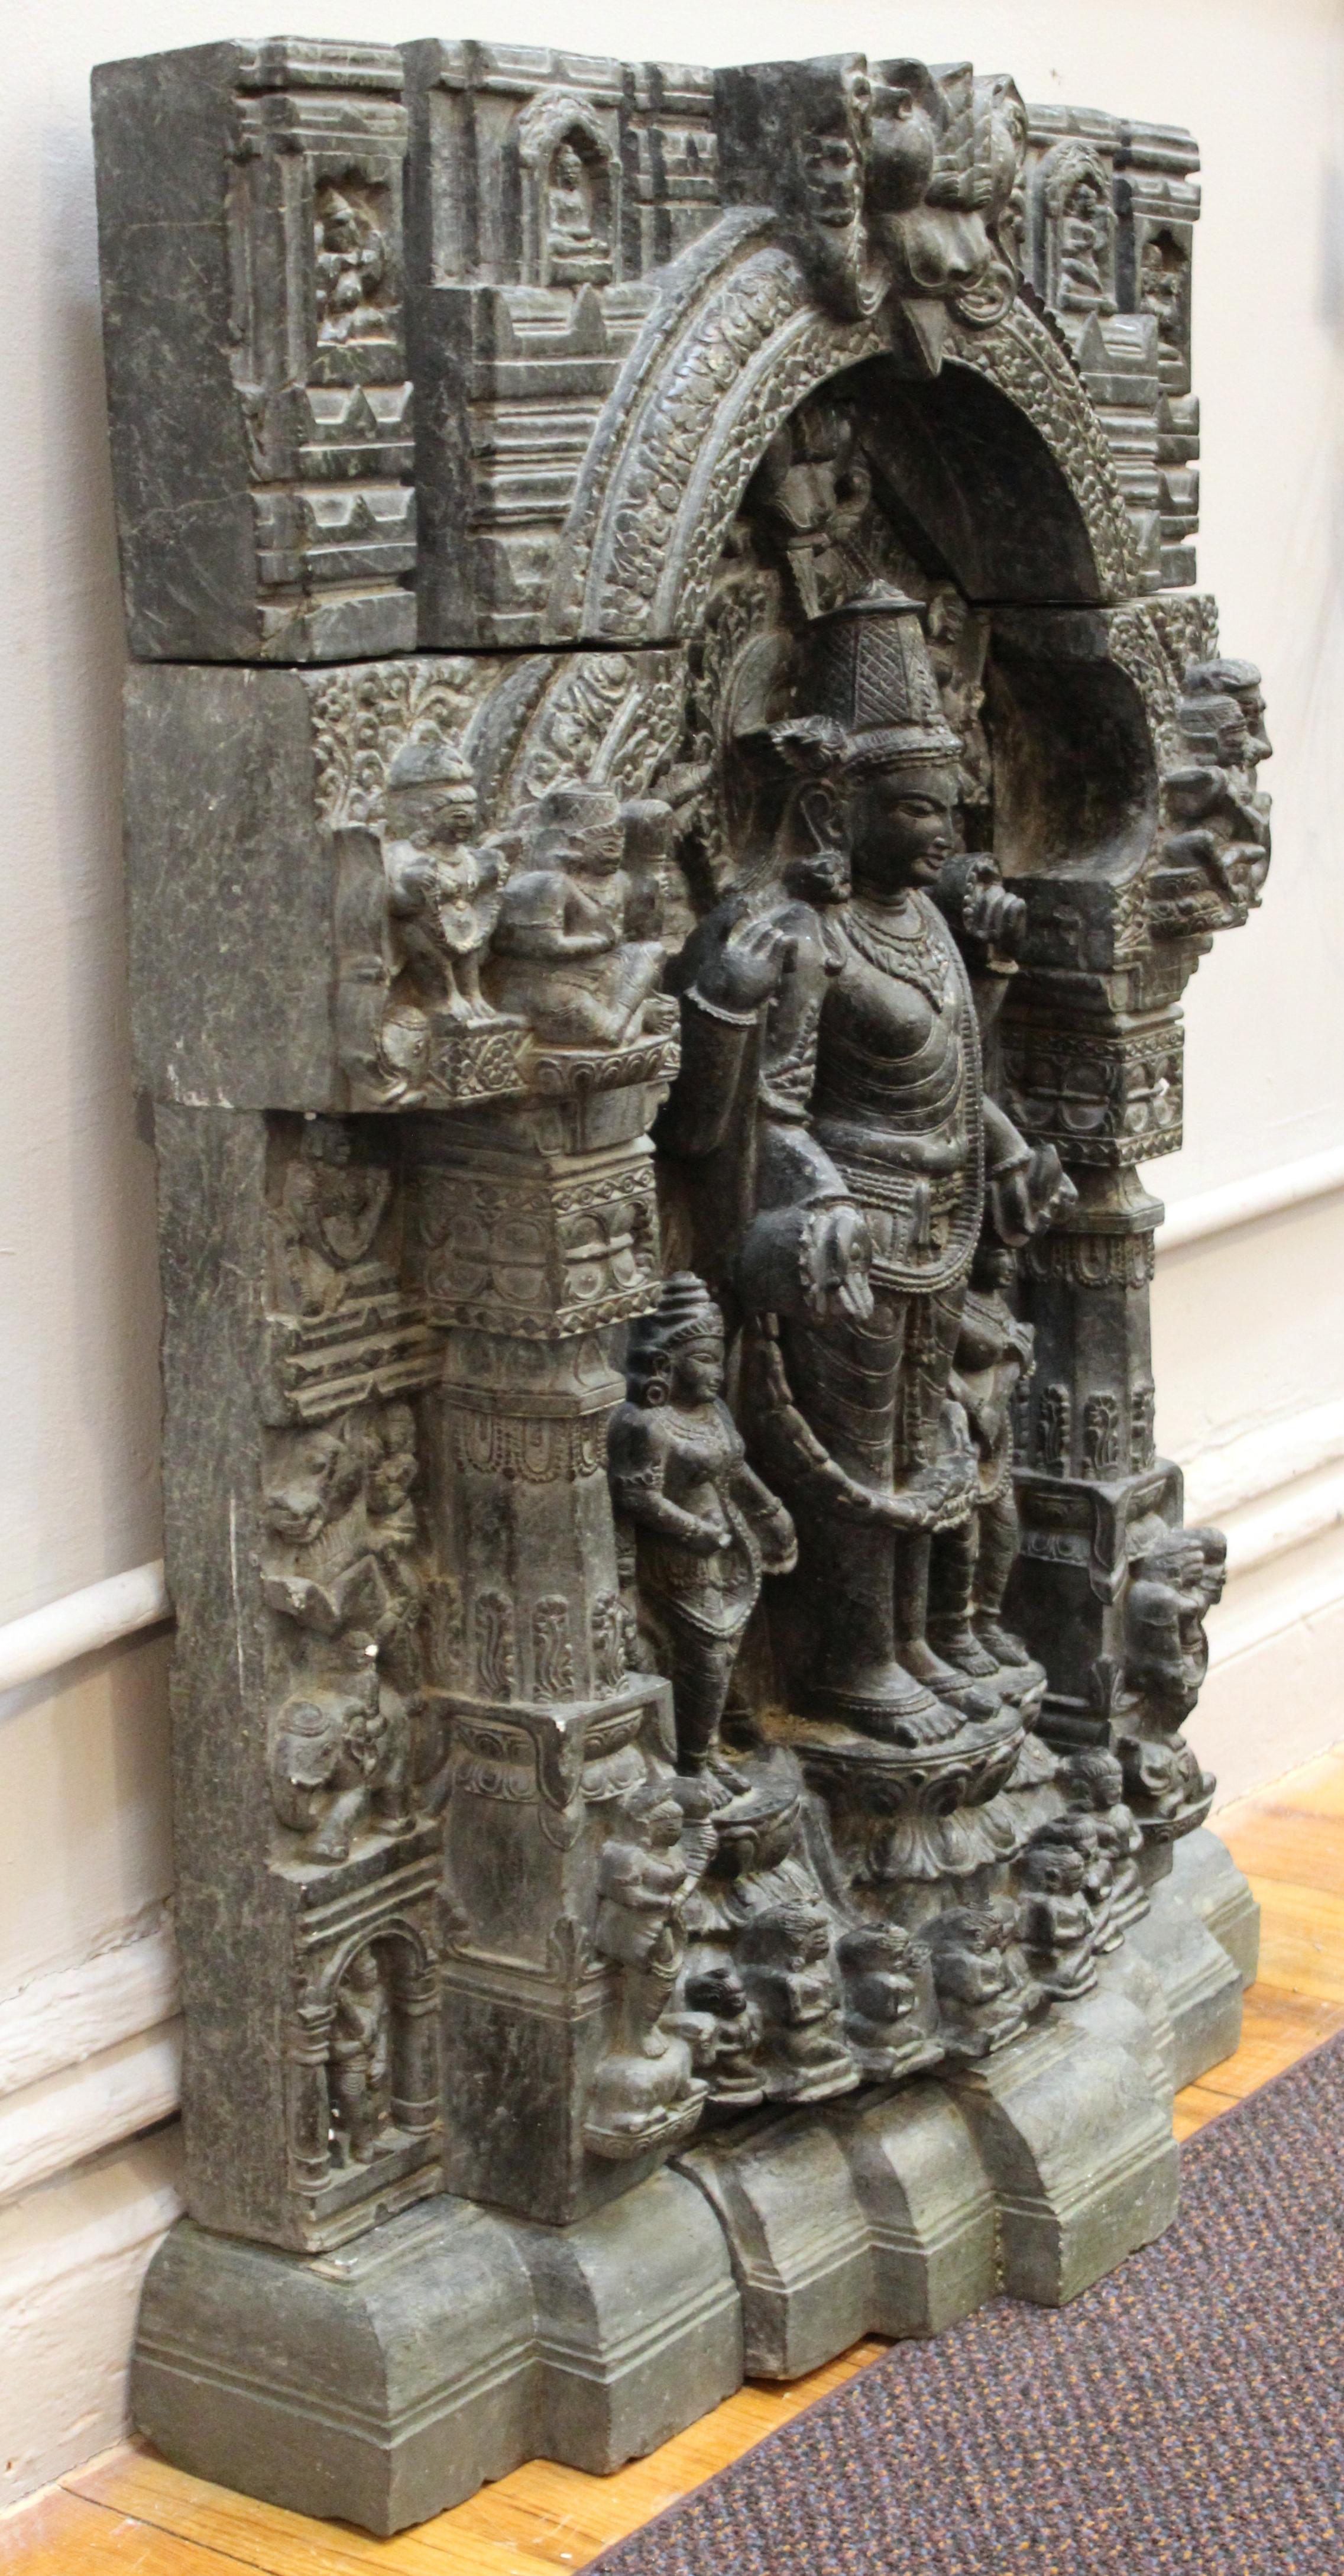 Indian Pala style stele of Bodhisattva Gautama Buddha carved into black basalt pieces, with a large carved central four-armed standing figure surrounded by smaller figures and carved elements surrounding the central stele, all atop a stepped